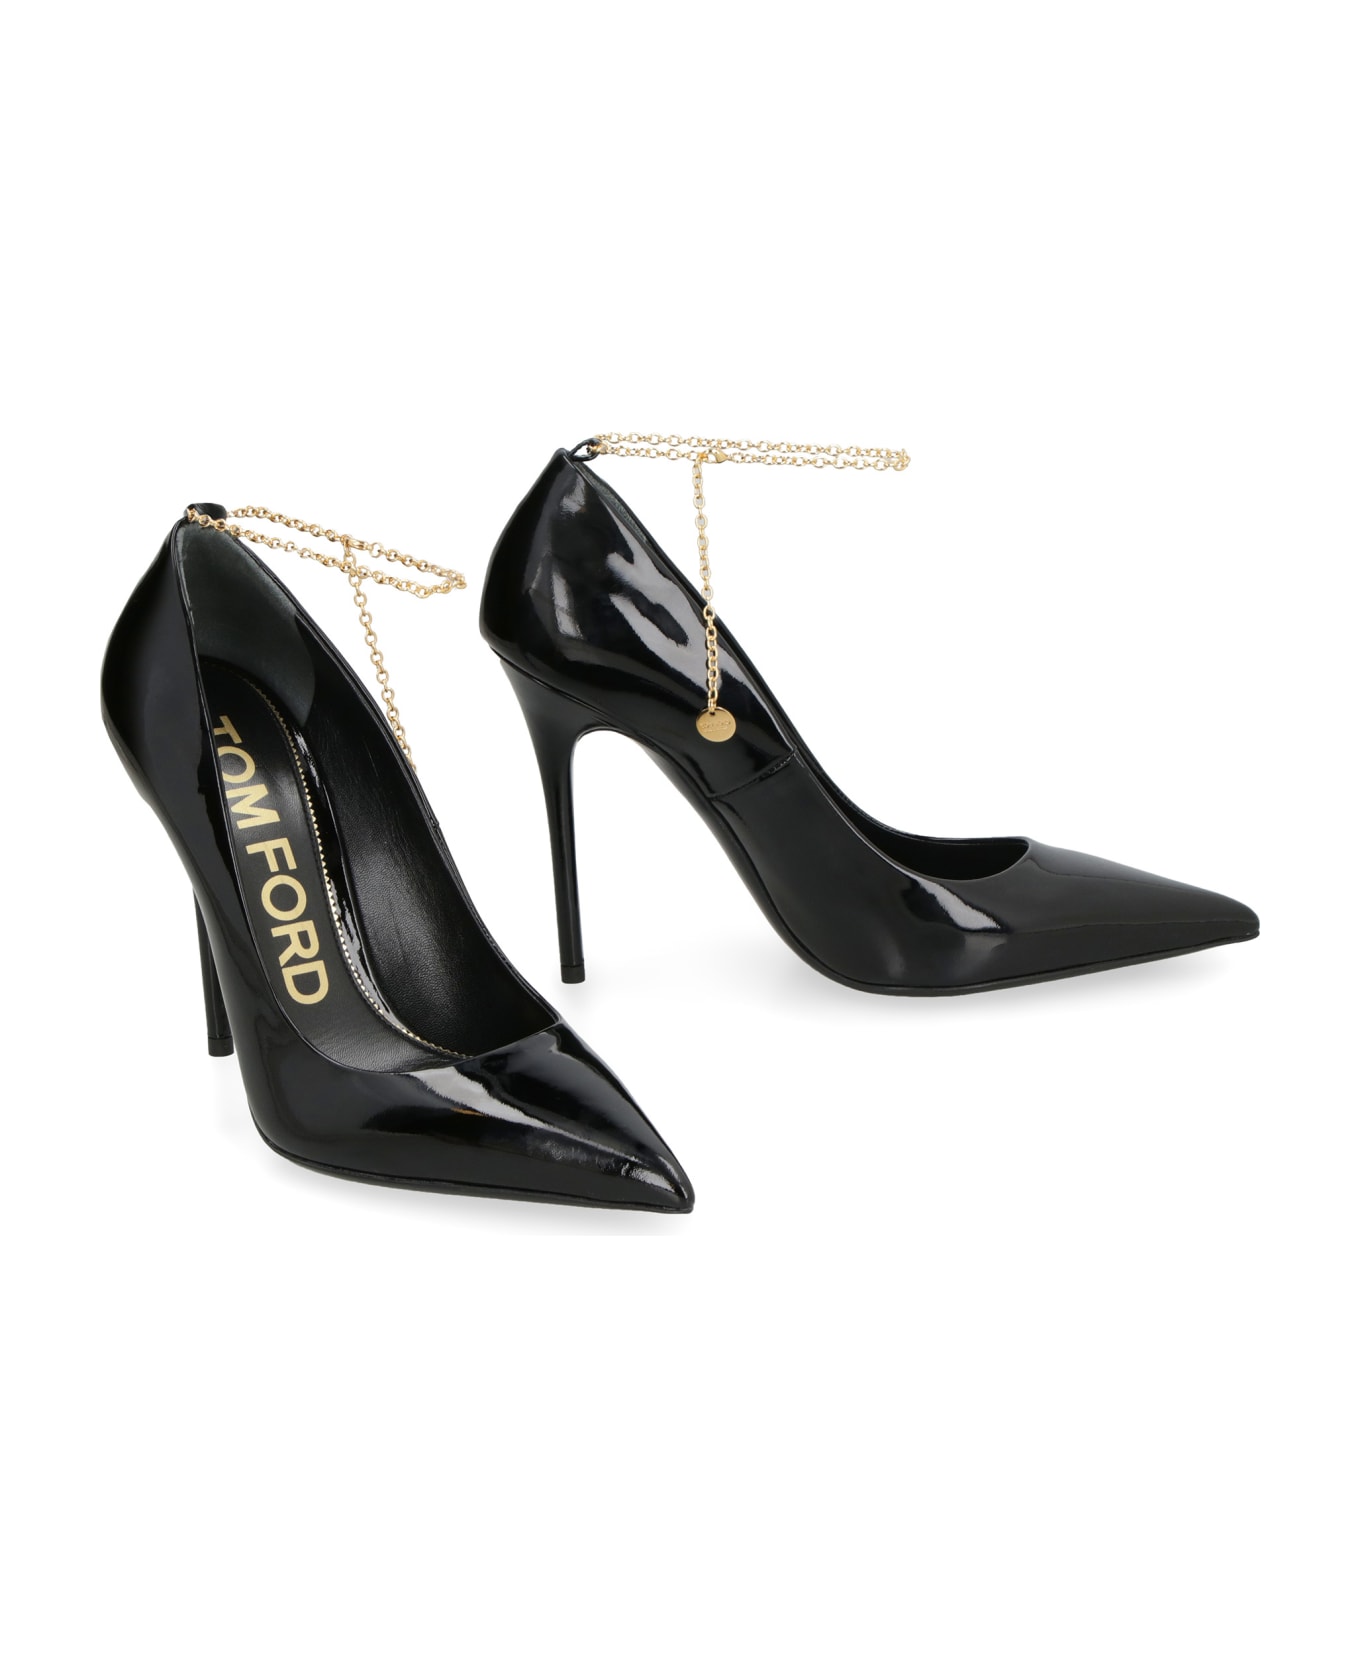 Tom Ford Patent Leather Pumps - black ハイヒール